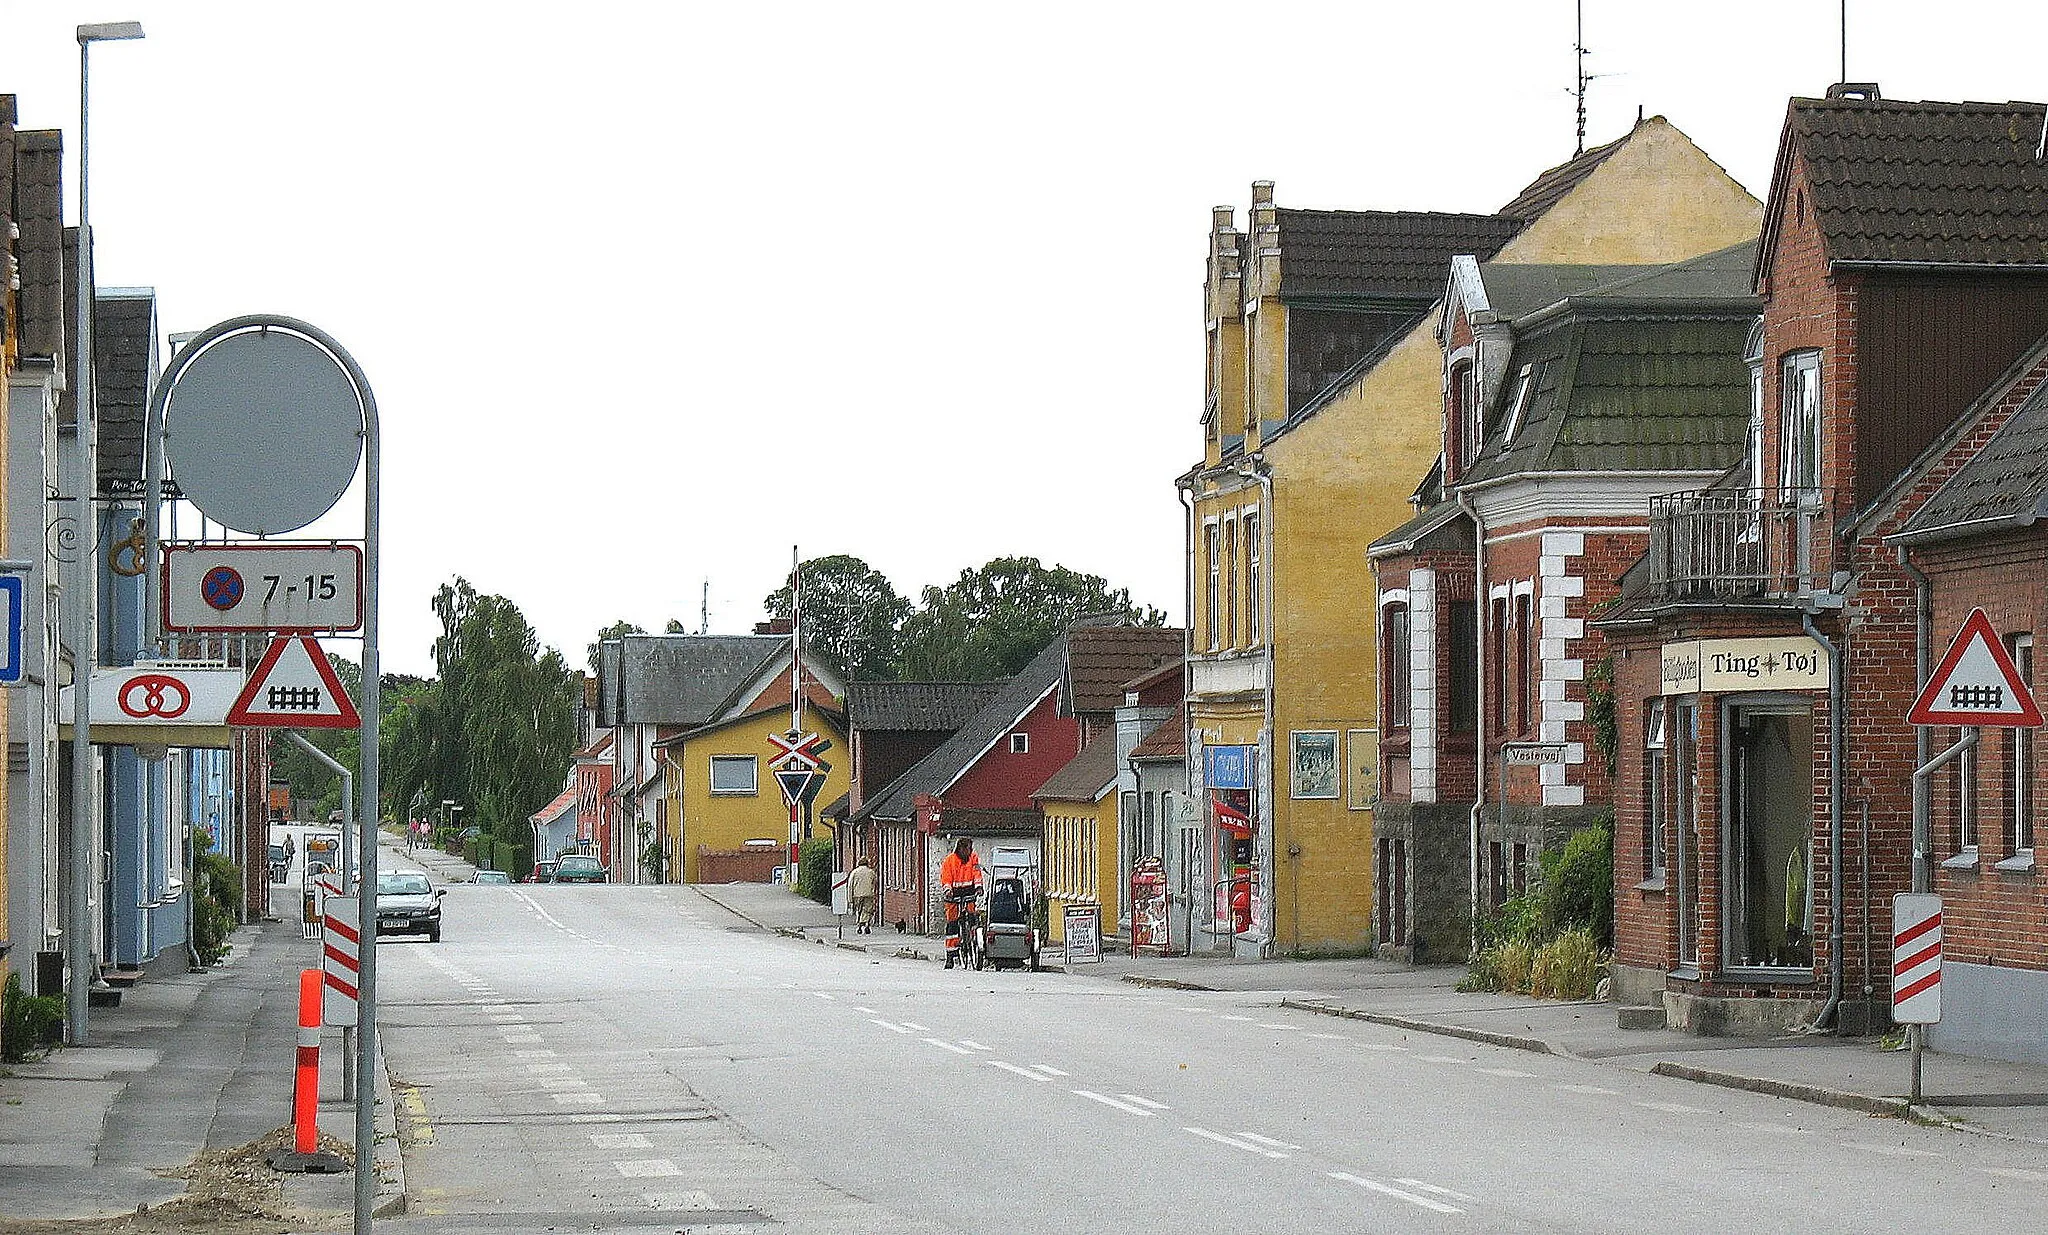 Photo showing: The small town "Søllested" located on the island Lolland in east Denmark.